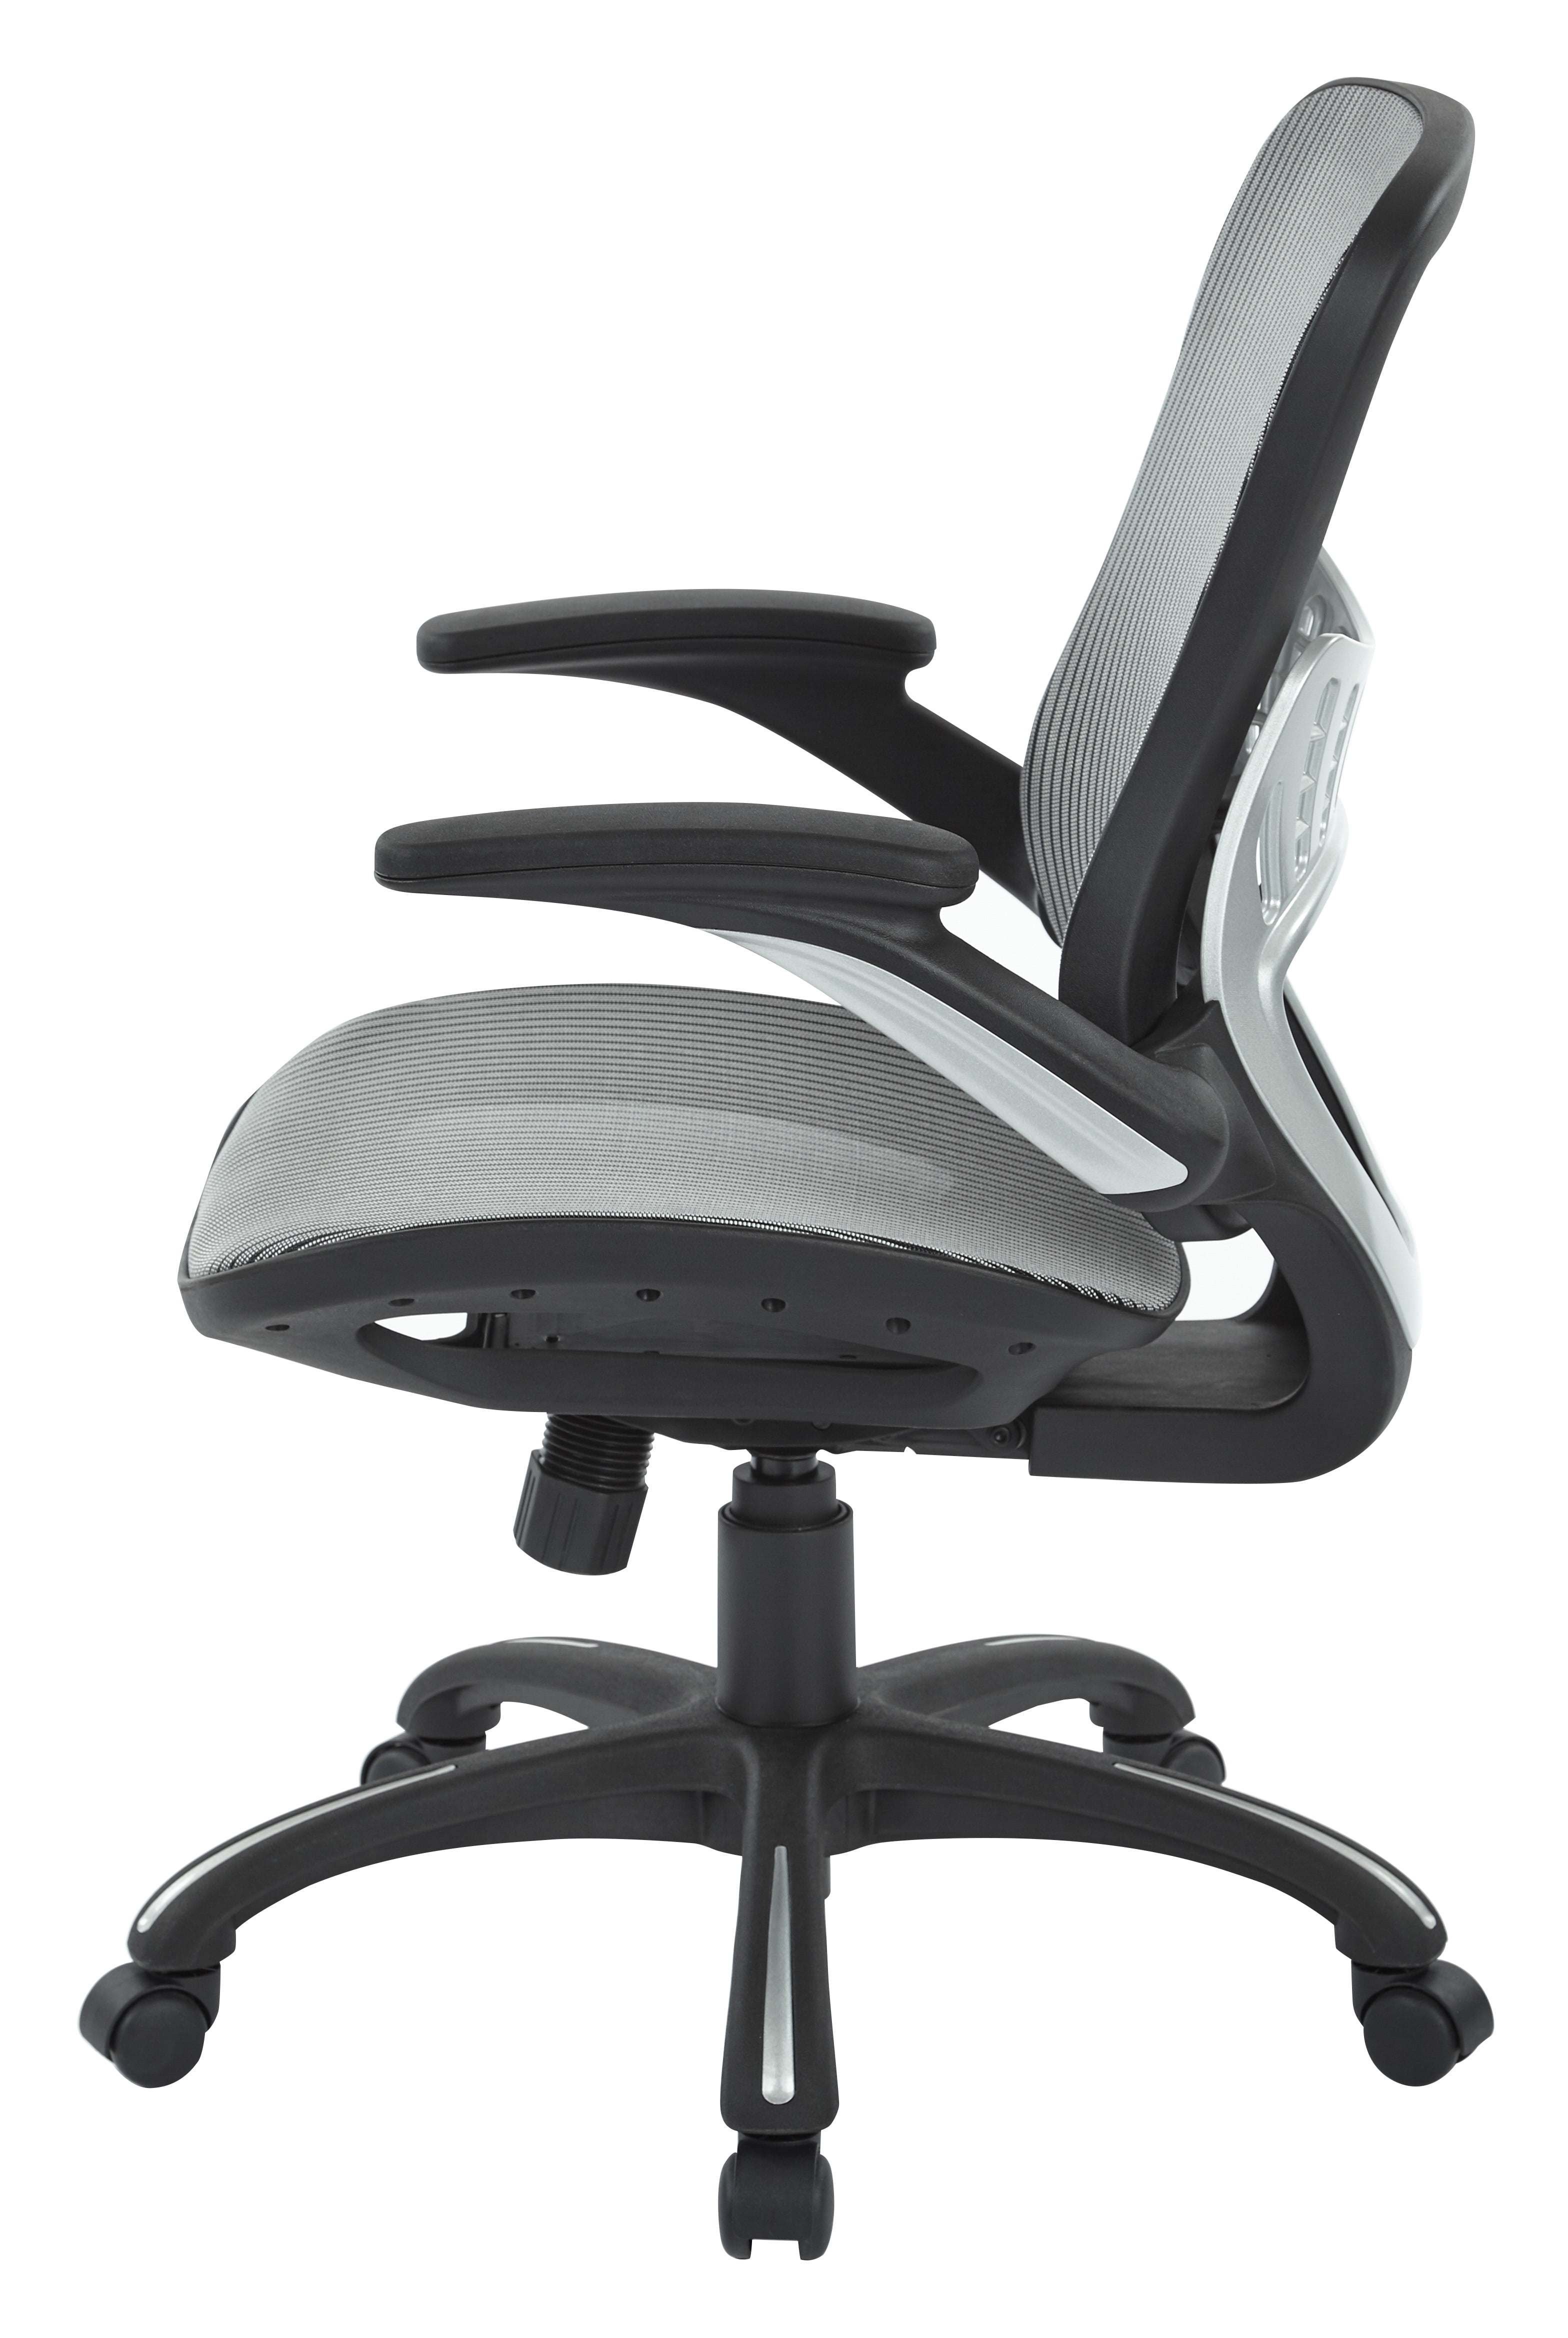 Work Smart 69906-3 Managers Chair with Mesh Seat and Back Black 